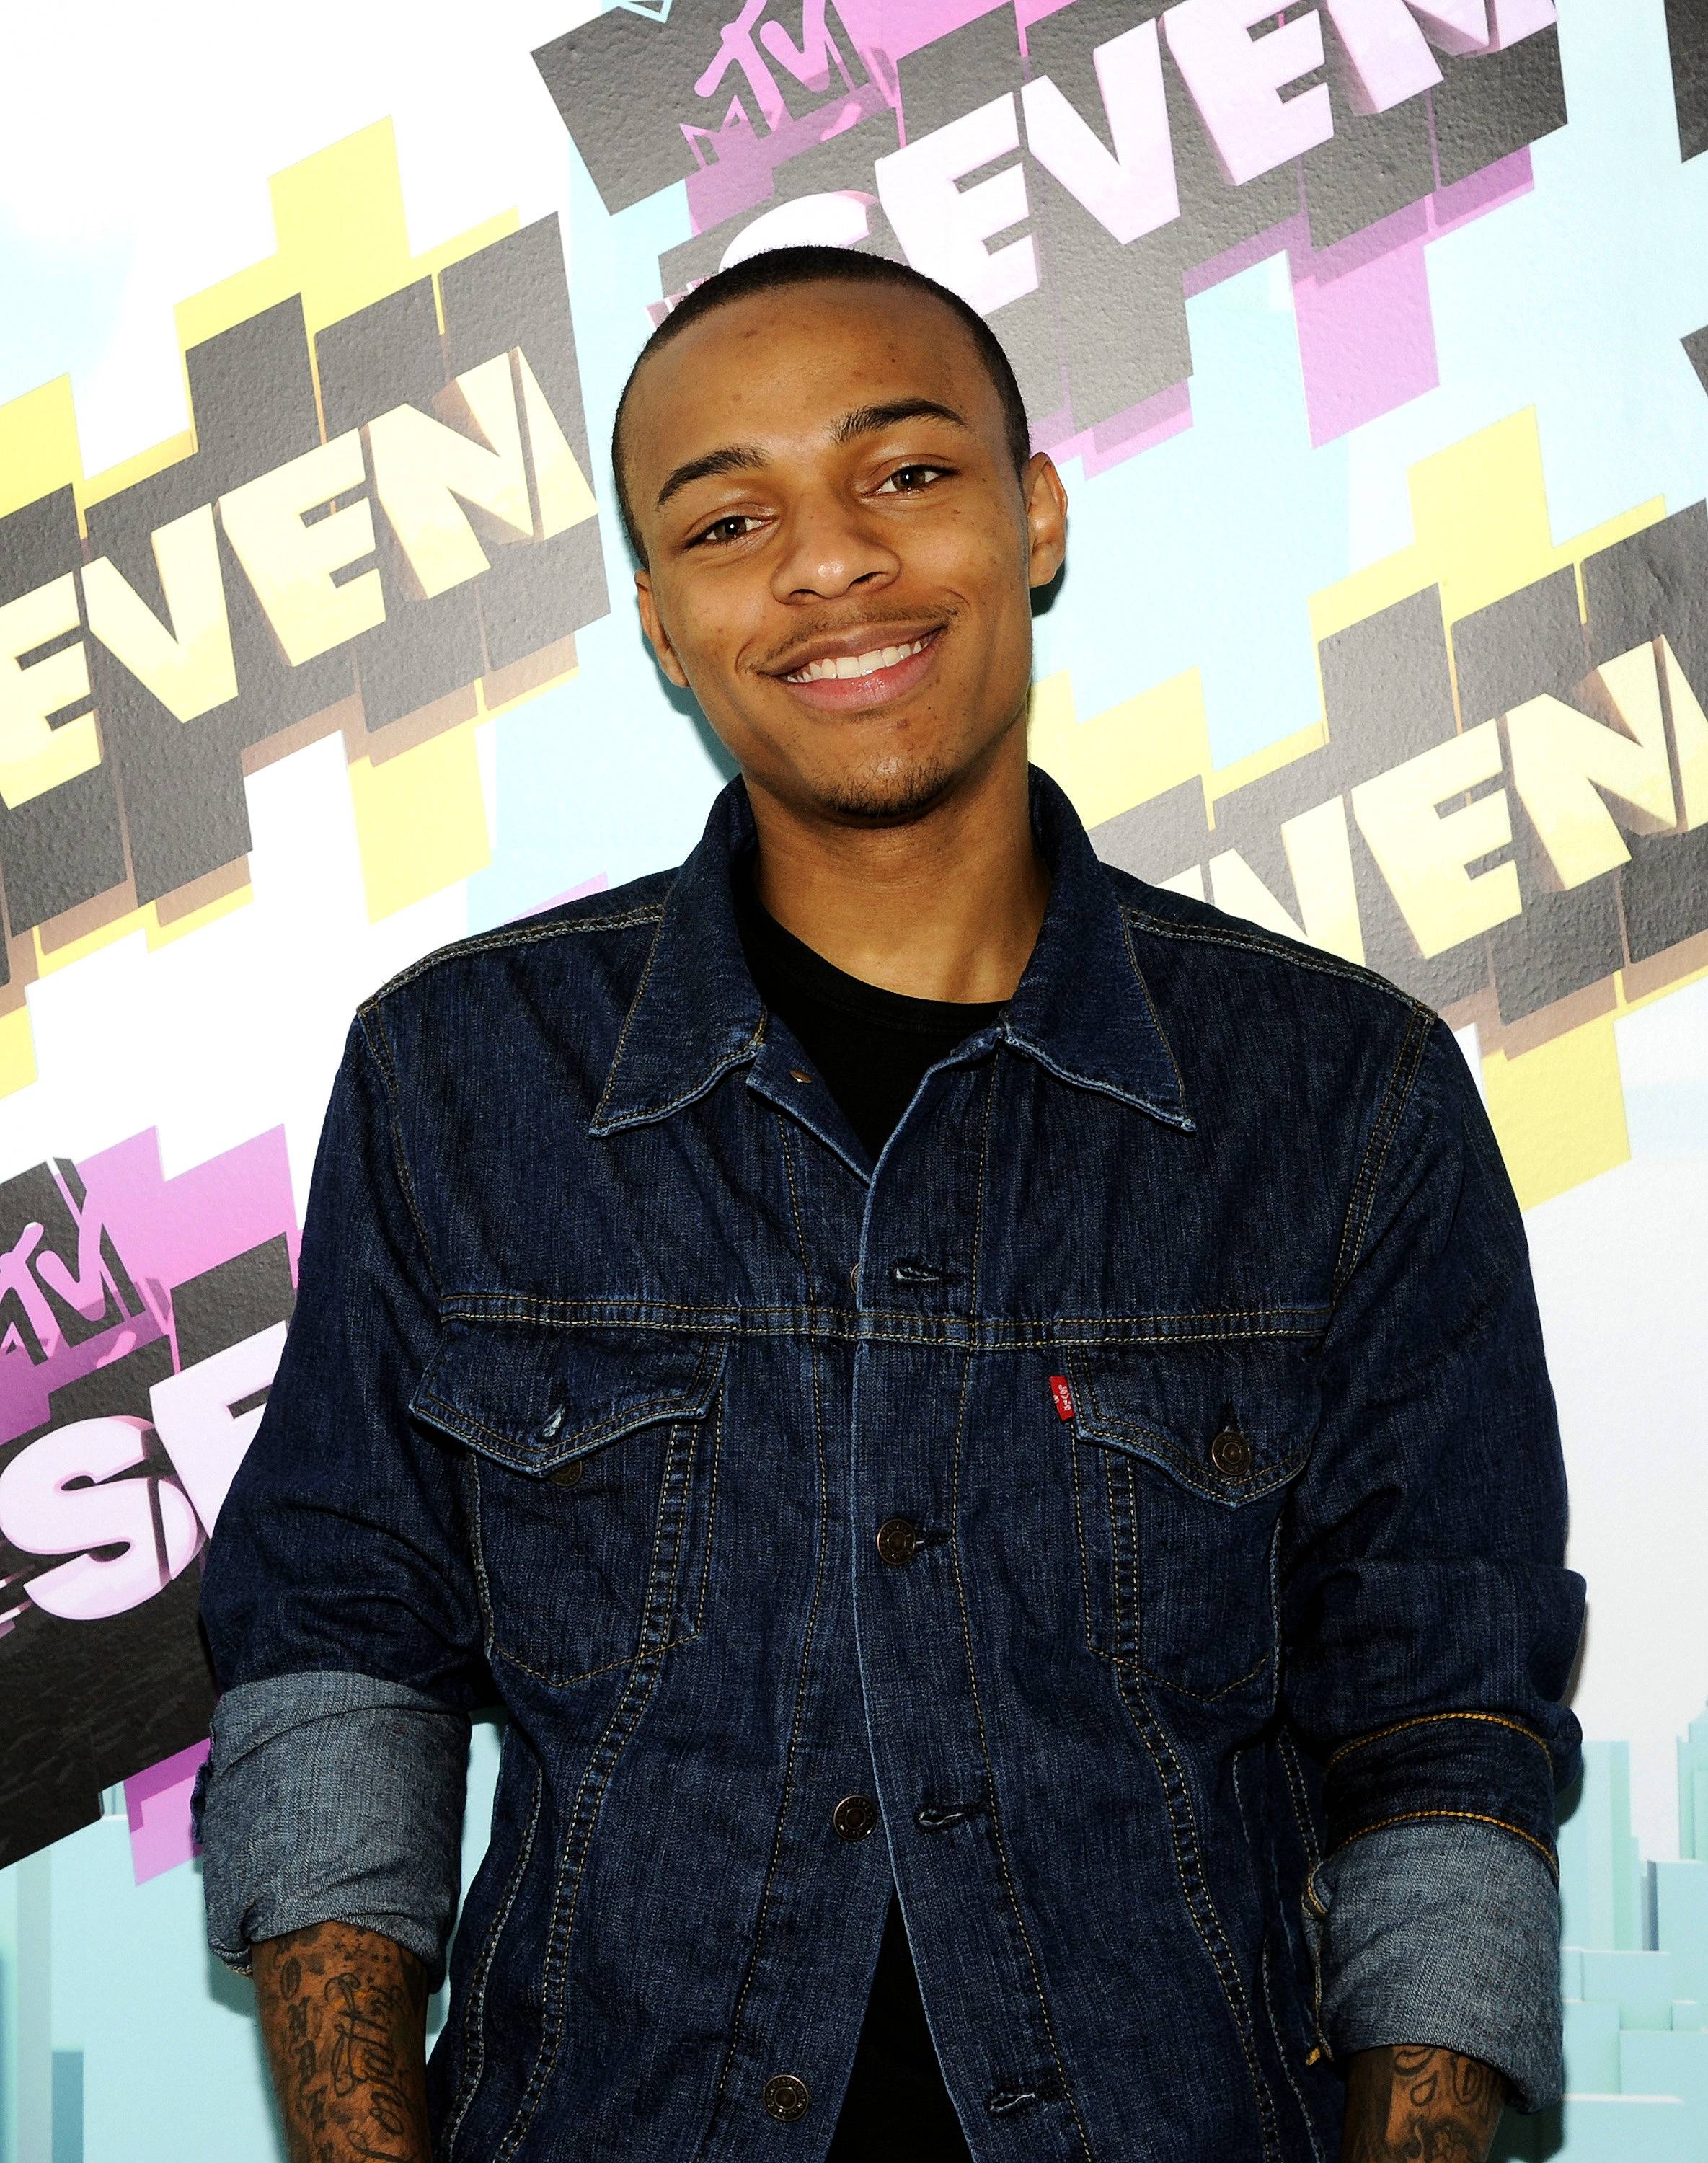 The Evolution of Bow Wow\r&nbsp; - He ain't so Lil' no more. Believe it or not, Bow Wow has been in the game for over 10 years. He had platinum records before T.I., Kanye or even 50 Cent. He's starred in movies and dated the hottest women in the game. Not bad for a former preteen idol, huh? Today Bow Wow, who's currently working on his Young Money debut, is stopping by 106 &amp; Park&nbsp;to give daps to the Livest Audience.&nbsp;But first, let's take a look back at his growth from pup to top dog.&nbsp;\r&nbsp;\r&nbsp;\r(Photo: Evan Agostini/PictureGroup)